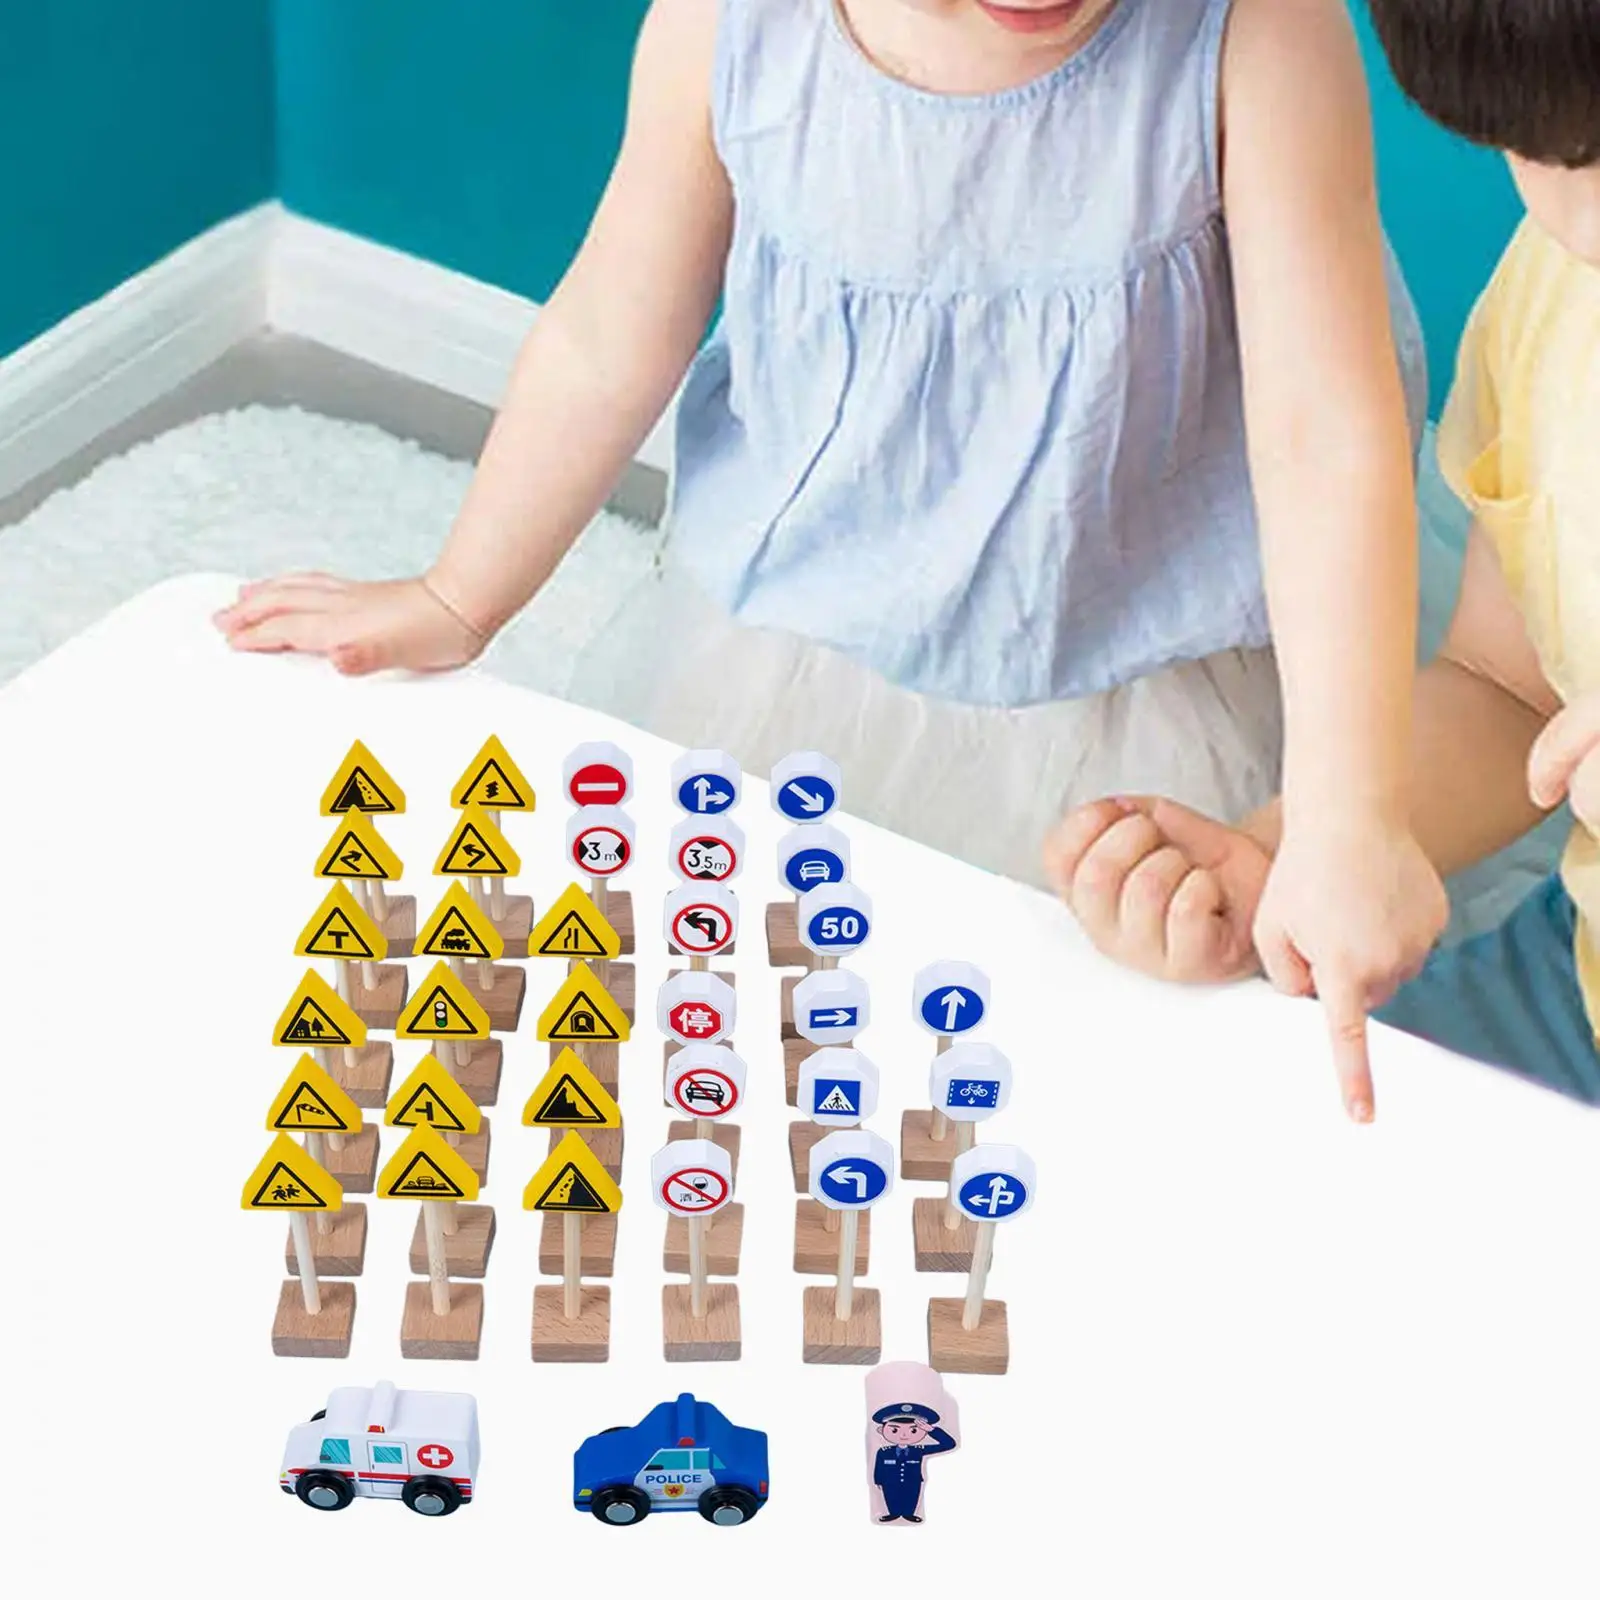 

Wooden Road Construction Traffic Sign Set Teaching Material Learning Activity for Kindergarten Babies Party Toy Classroom Kids